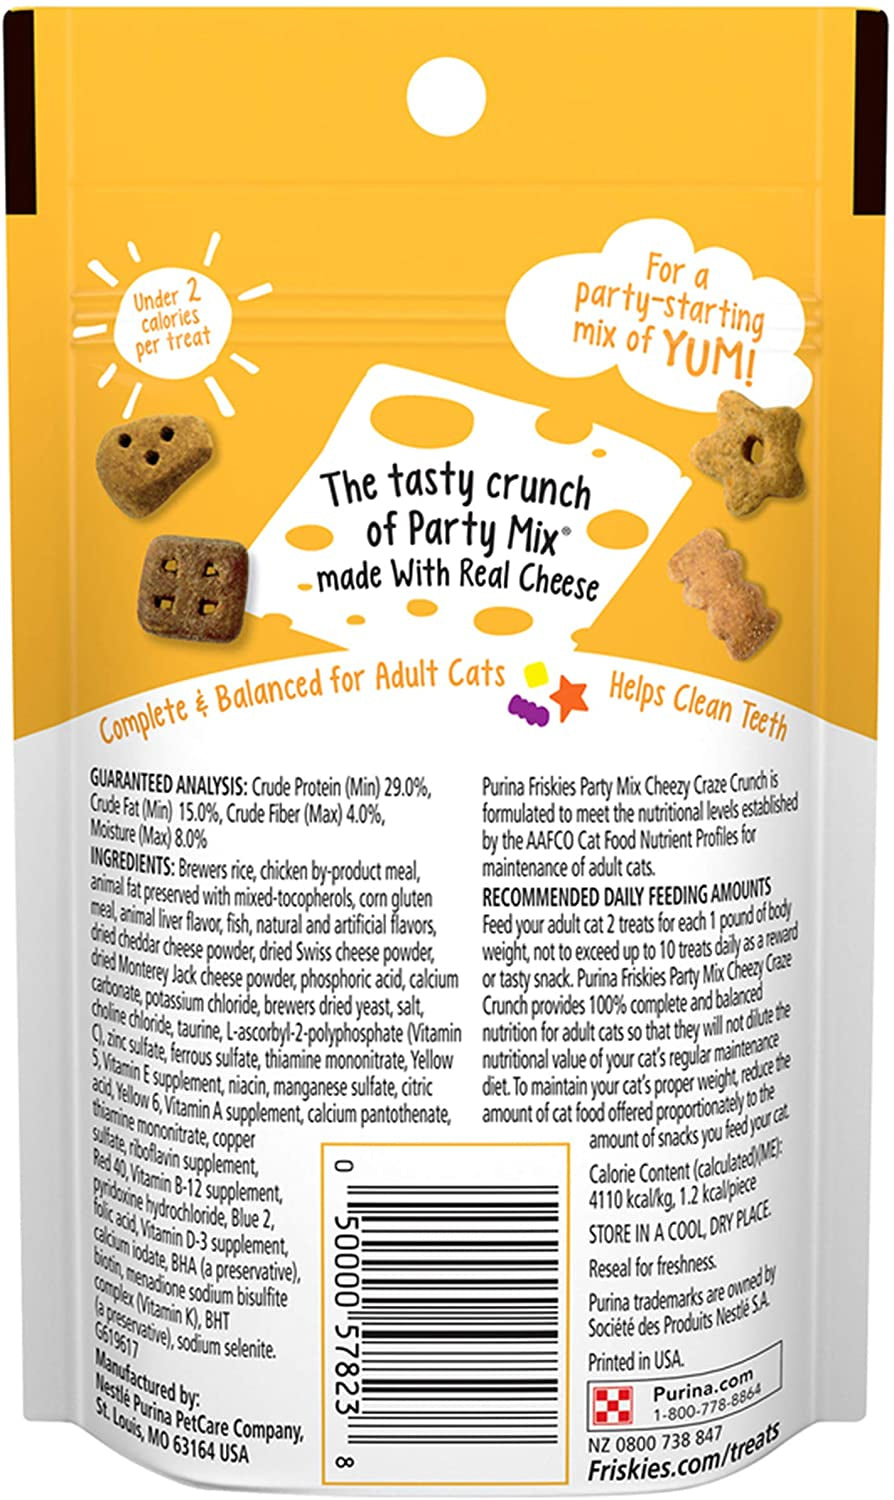 14.7 oz (7 x 2.1 oz) Friskies Party Mix Cheezy Craze Crunch with a Blend of Cheddar, Swiss and Monterey Jack Cat Treats